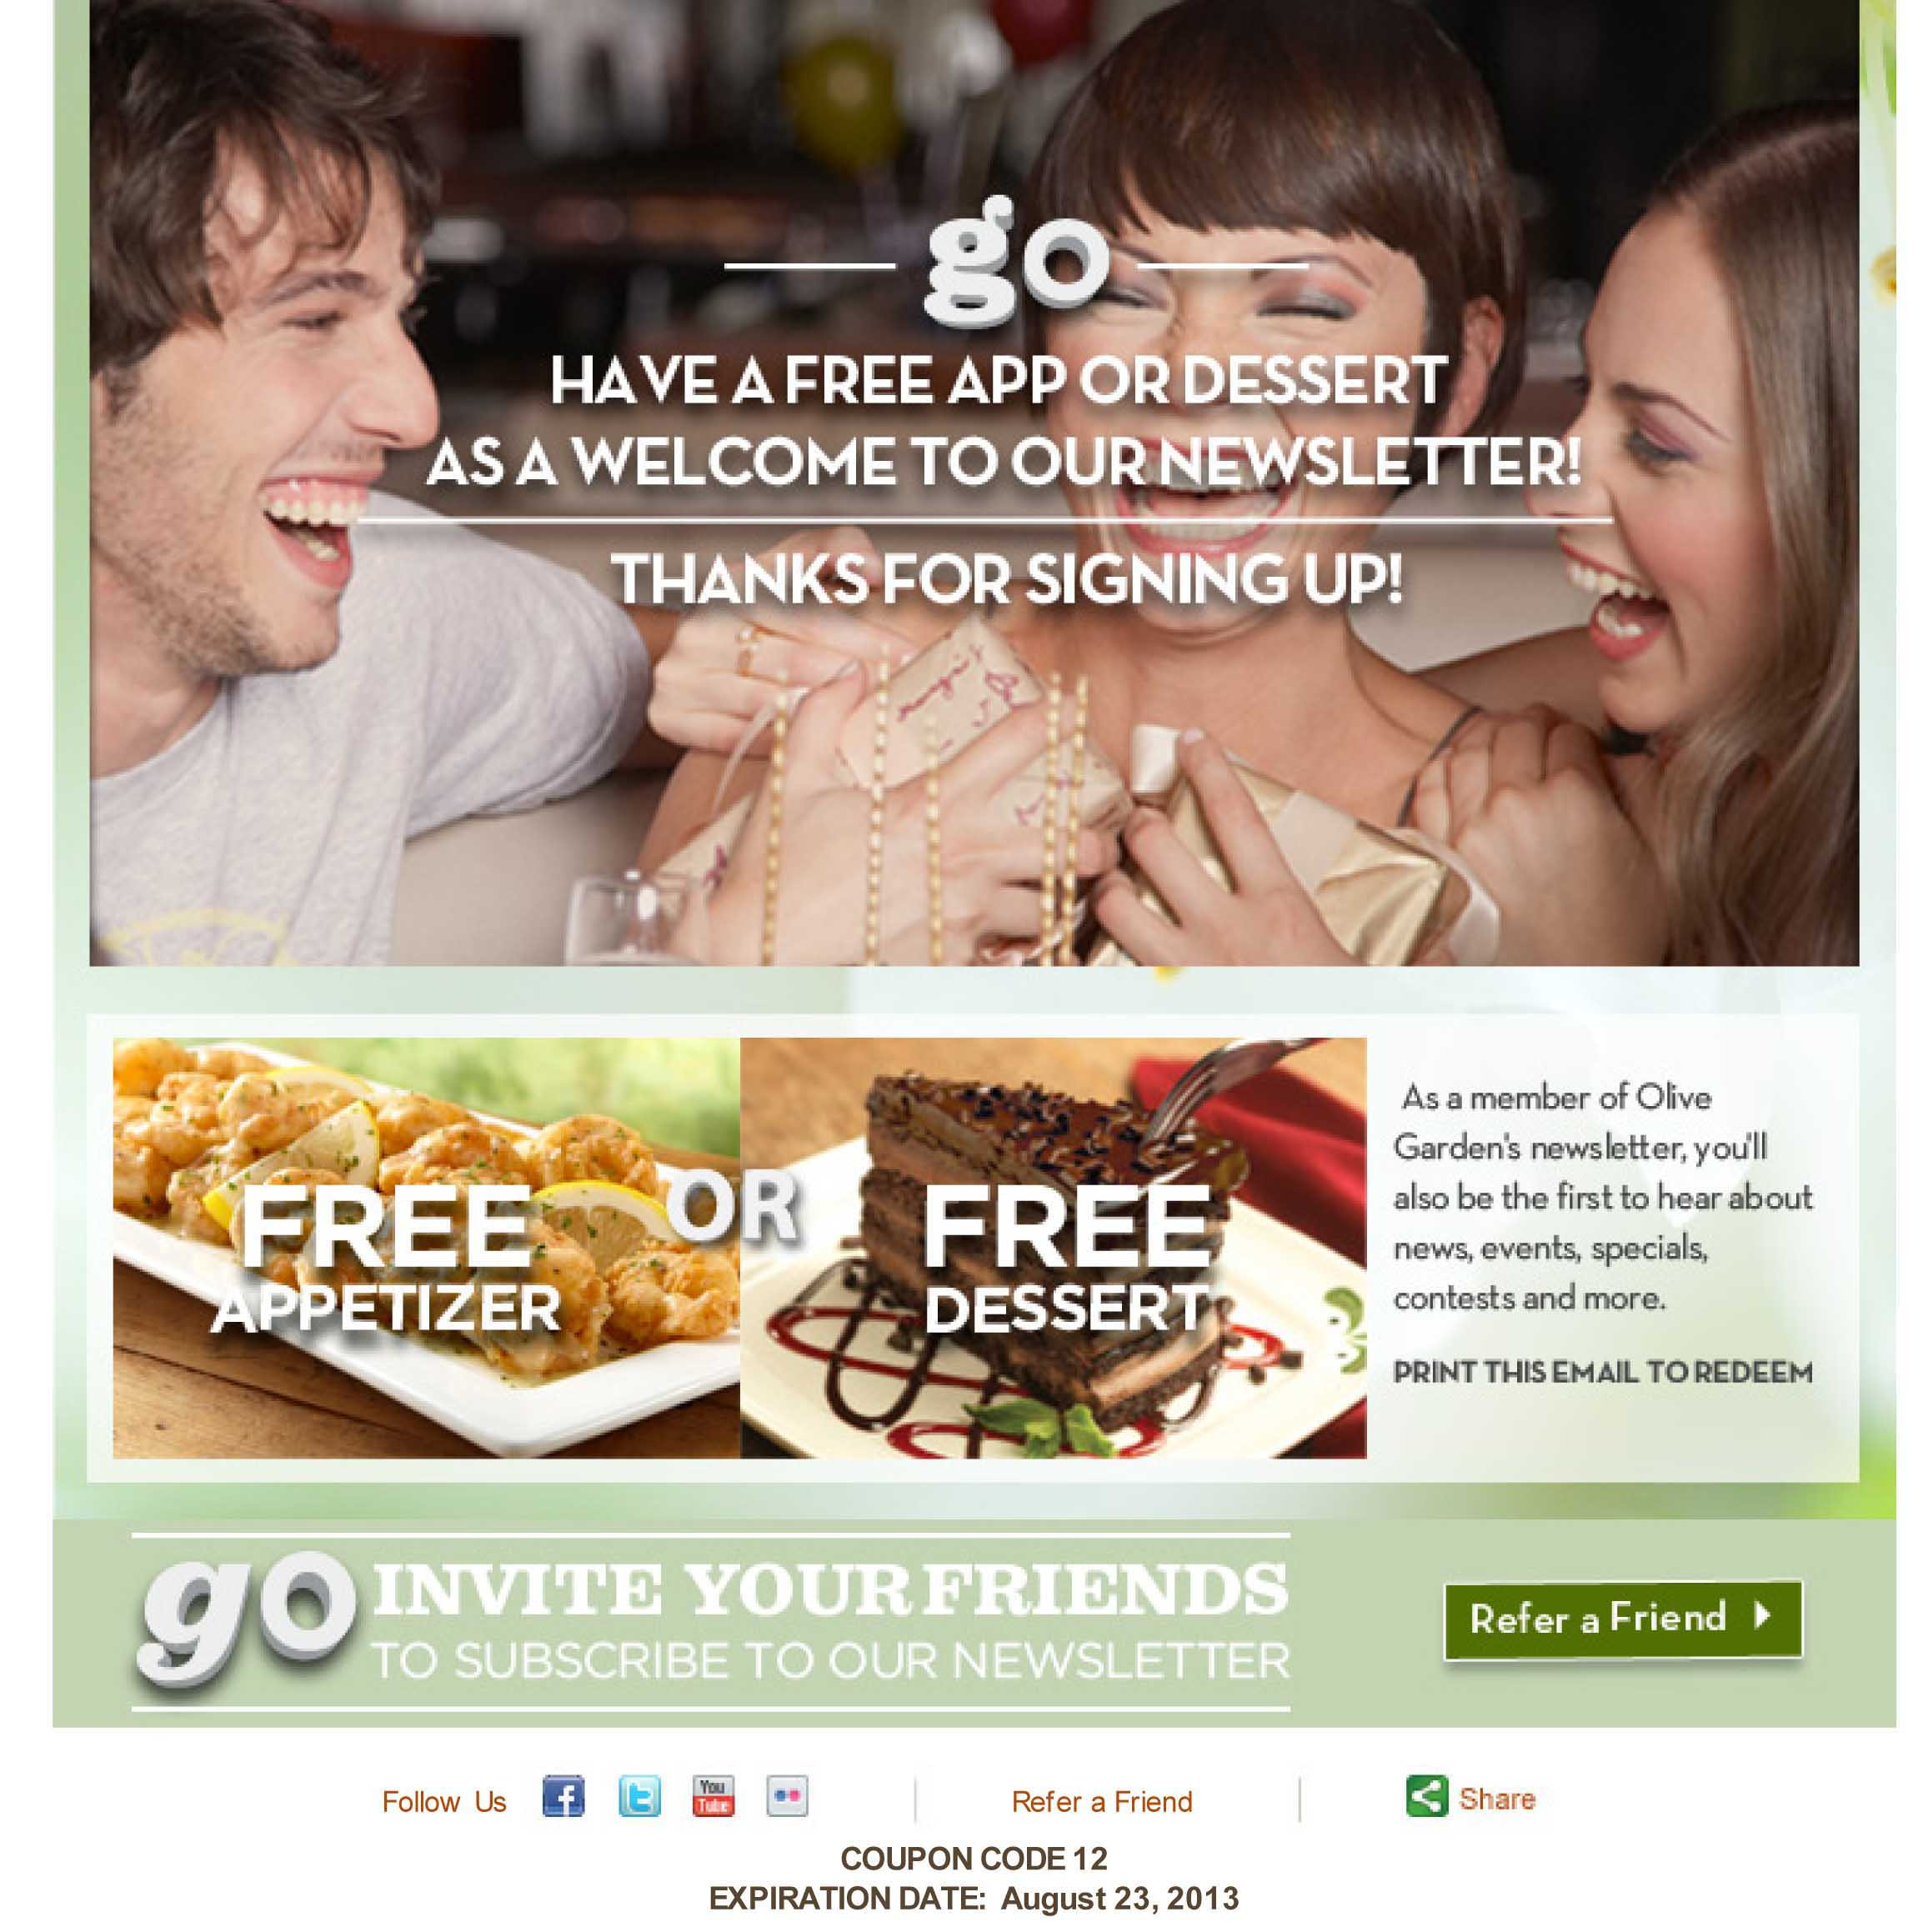 Olive Garden Free Dessert Coupon
 The Olive Garden discount coupon